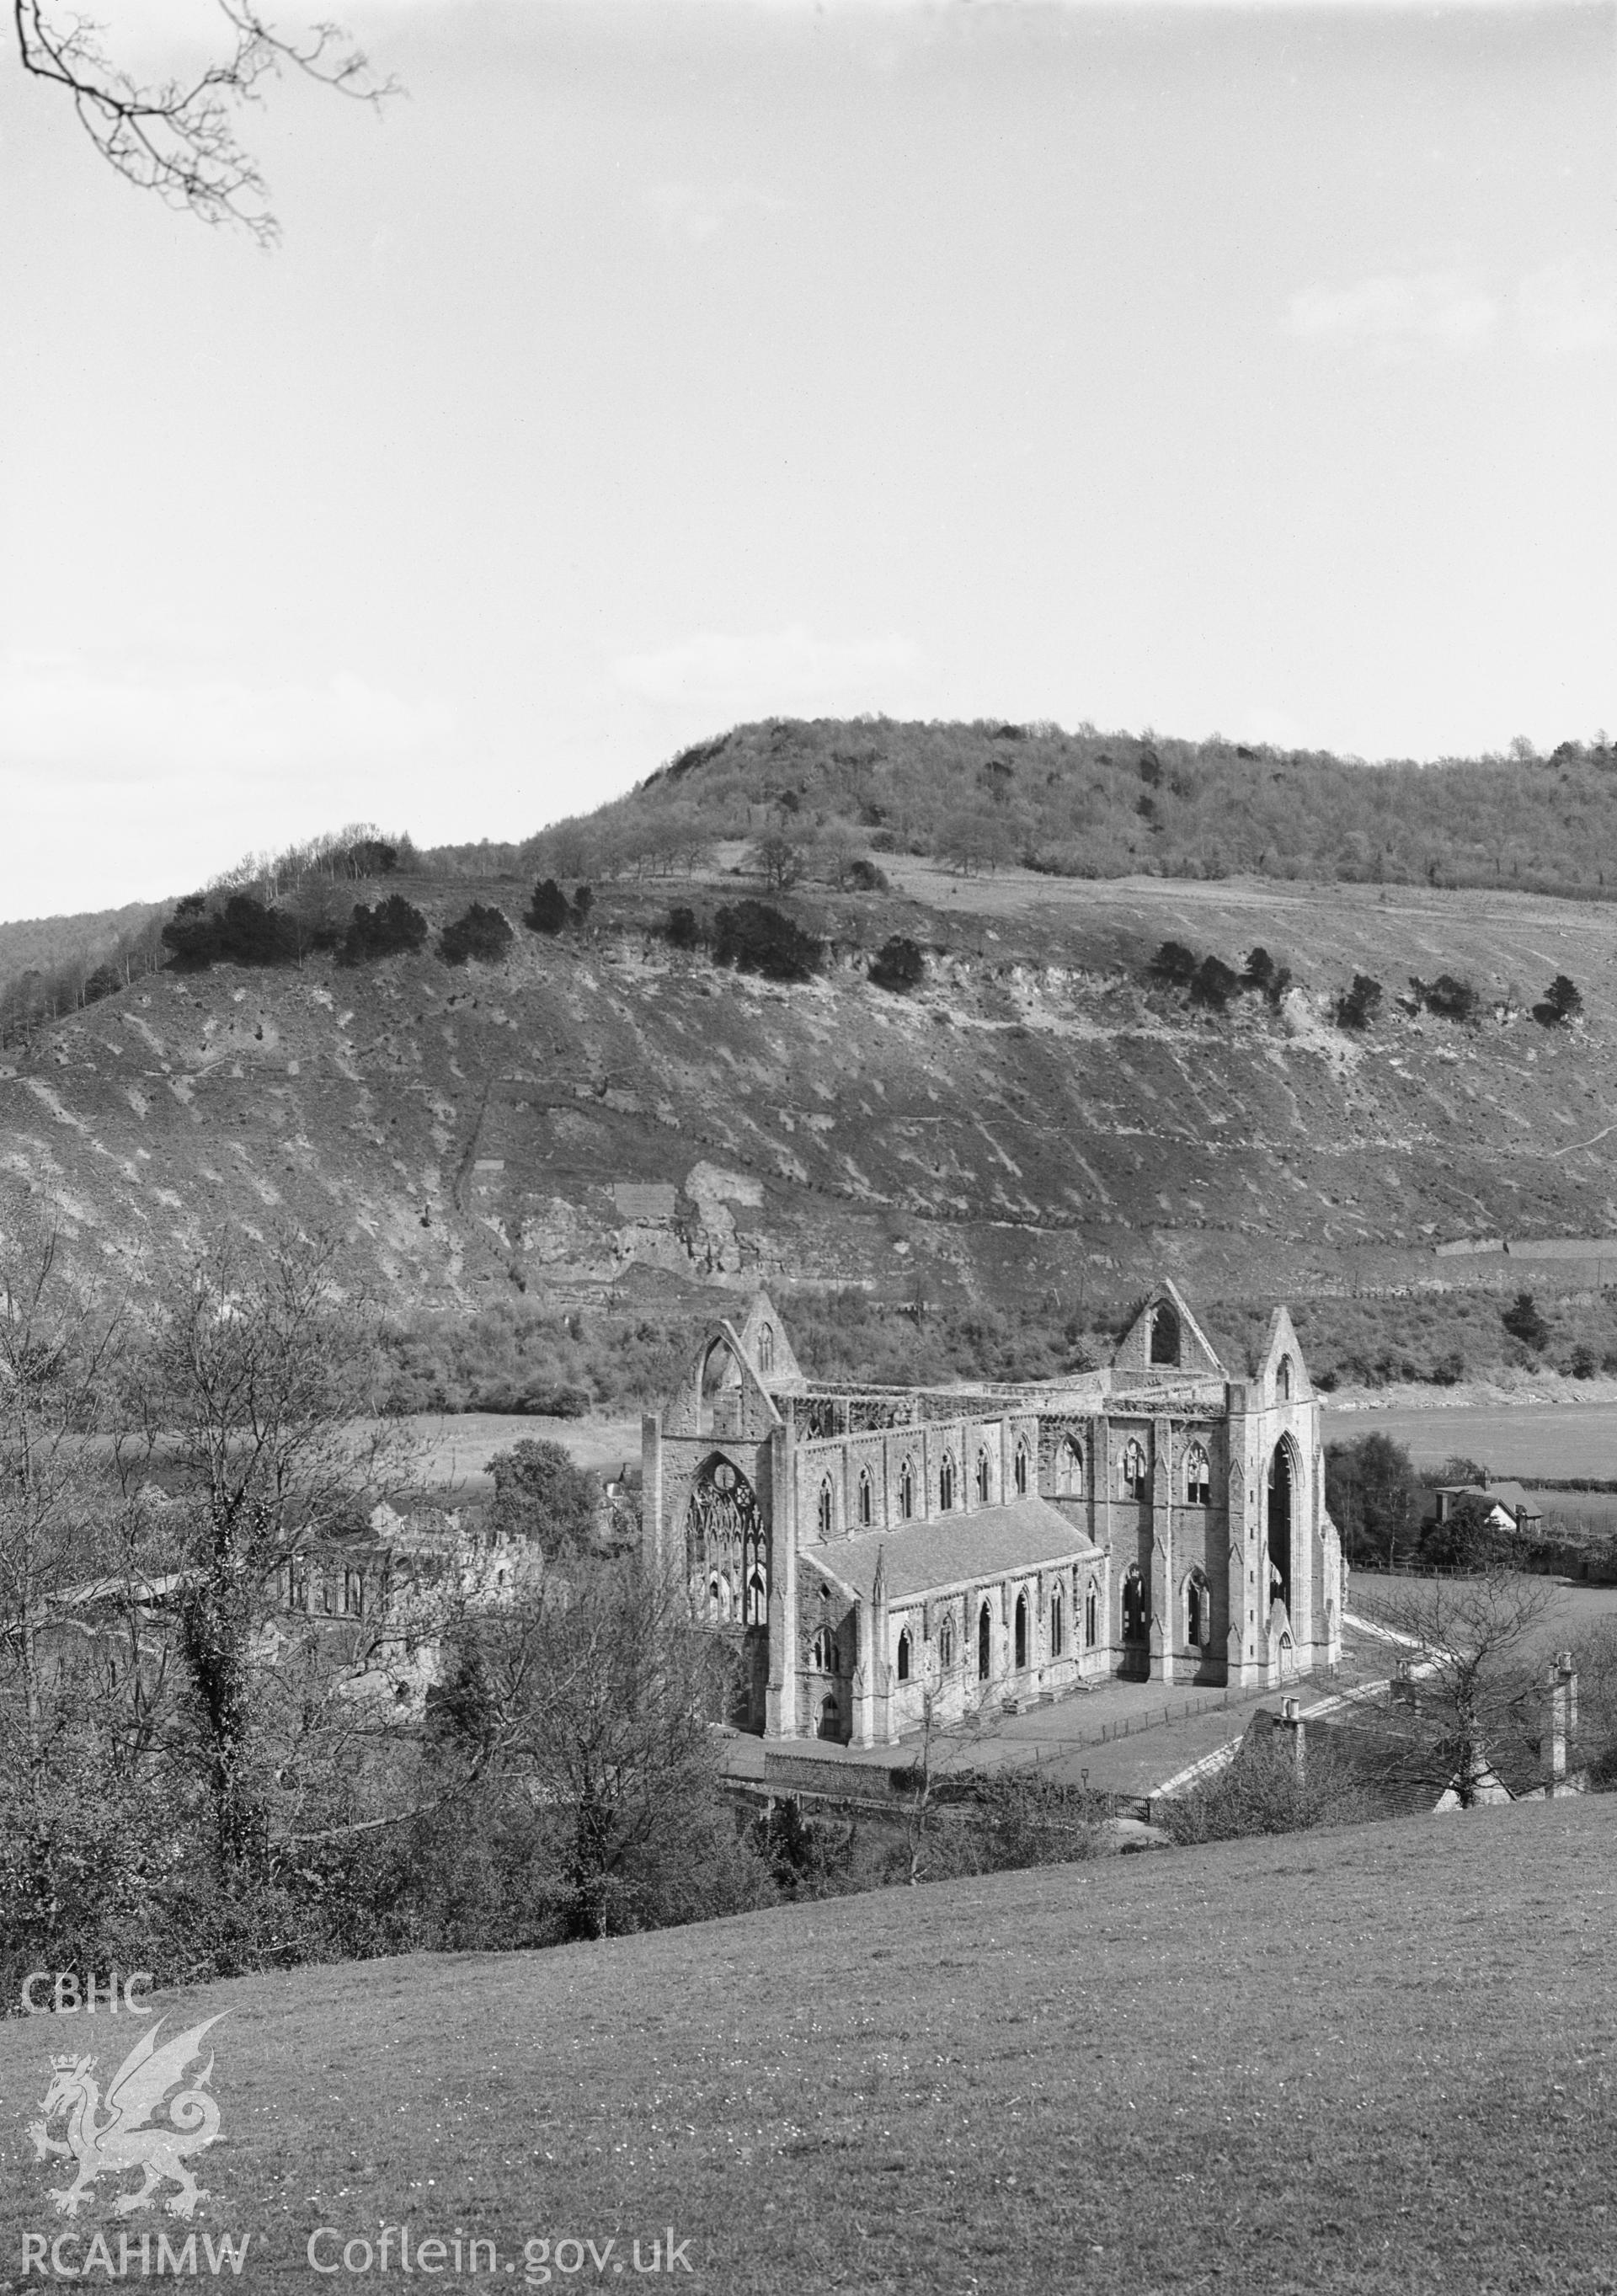 View of Tintern Abbey from the southwest, taken by Clayton.